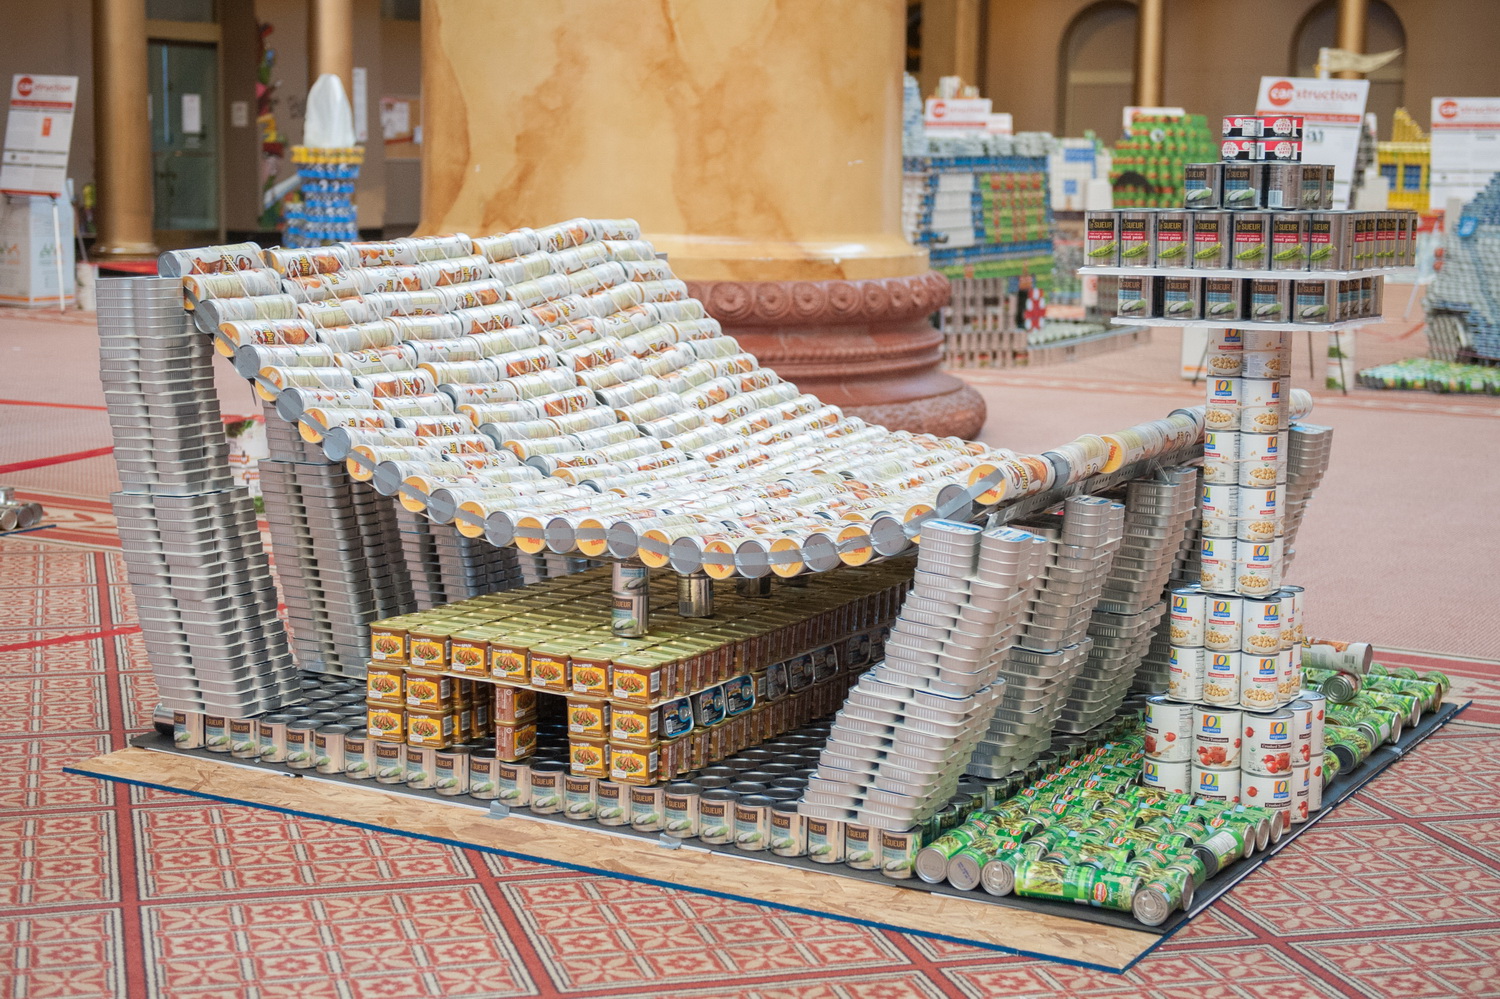 KCCT_Canstruction2015_reduced